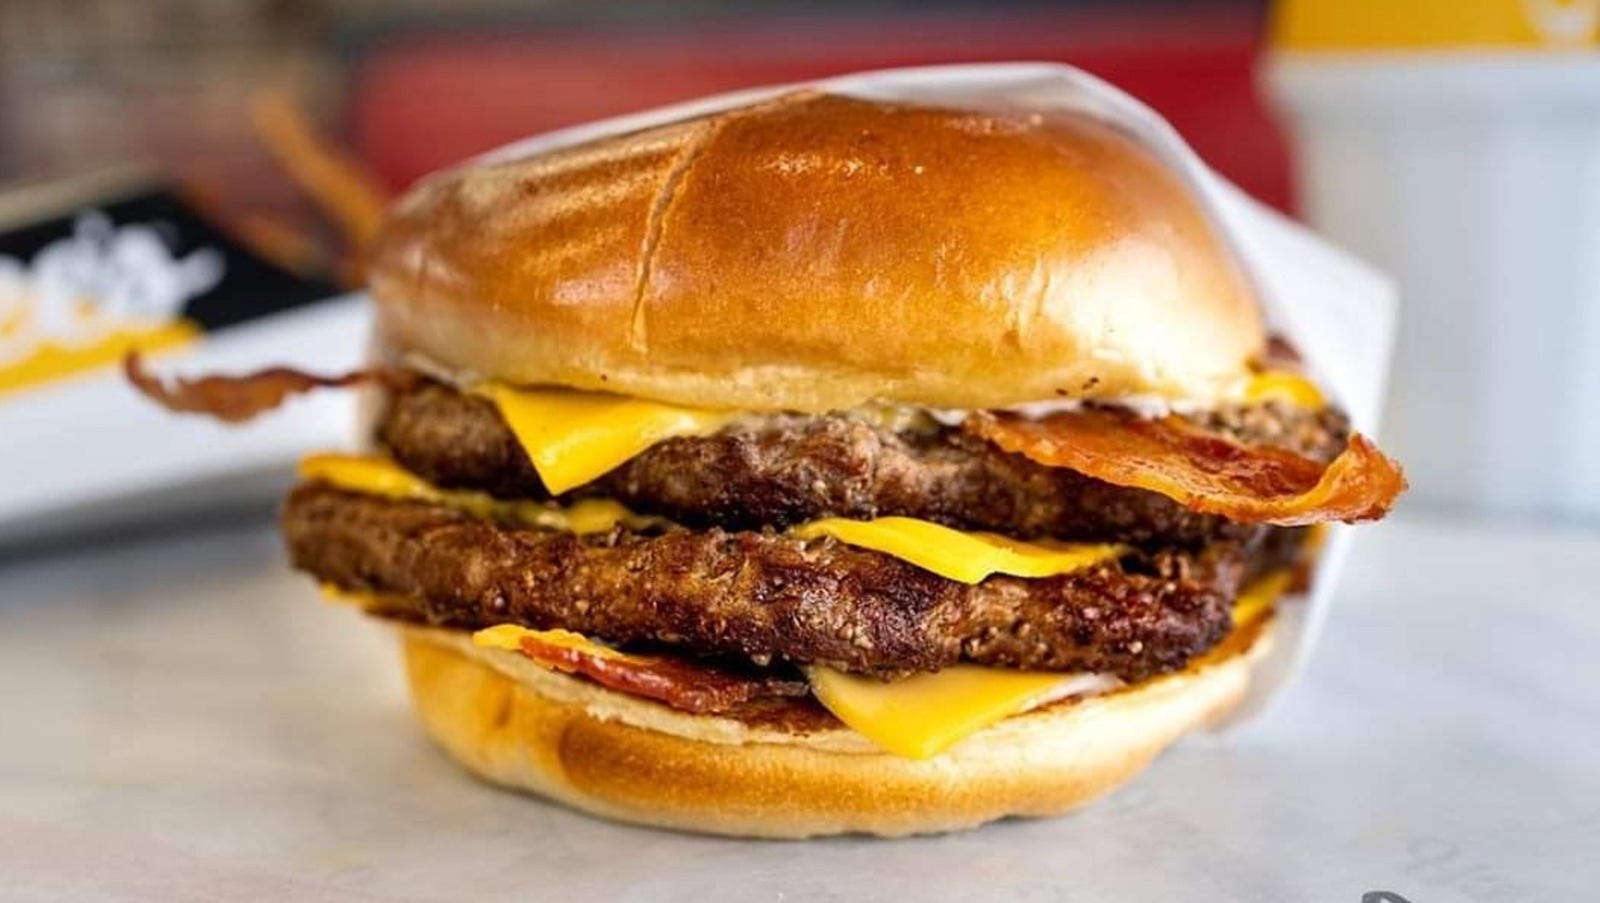 What Made Hardee's Frisco Burger Such A Big Deal When It Came Out